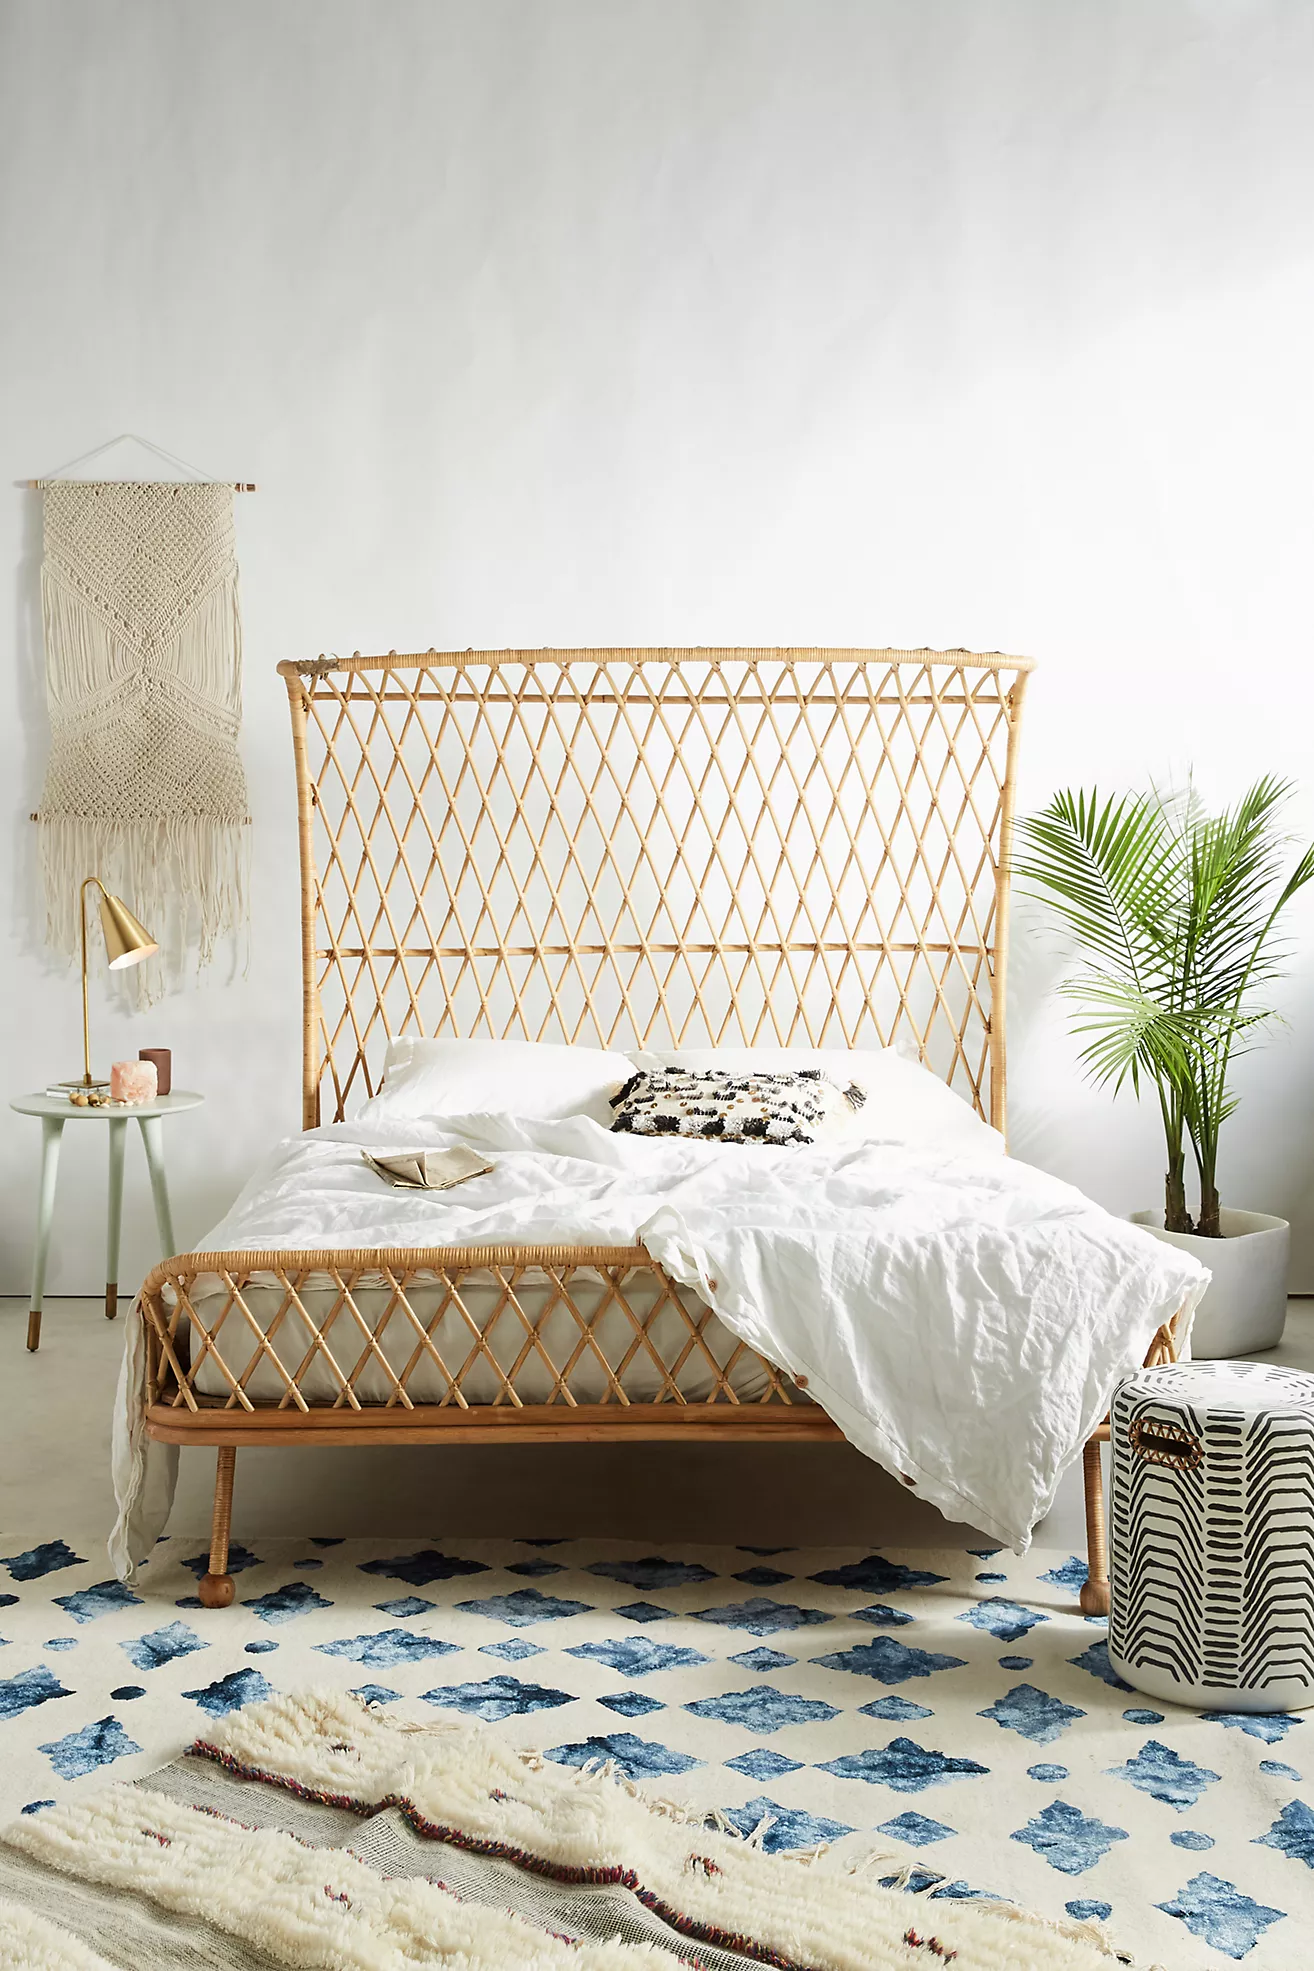 Choose a Show-Stopping Bed